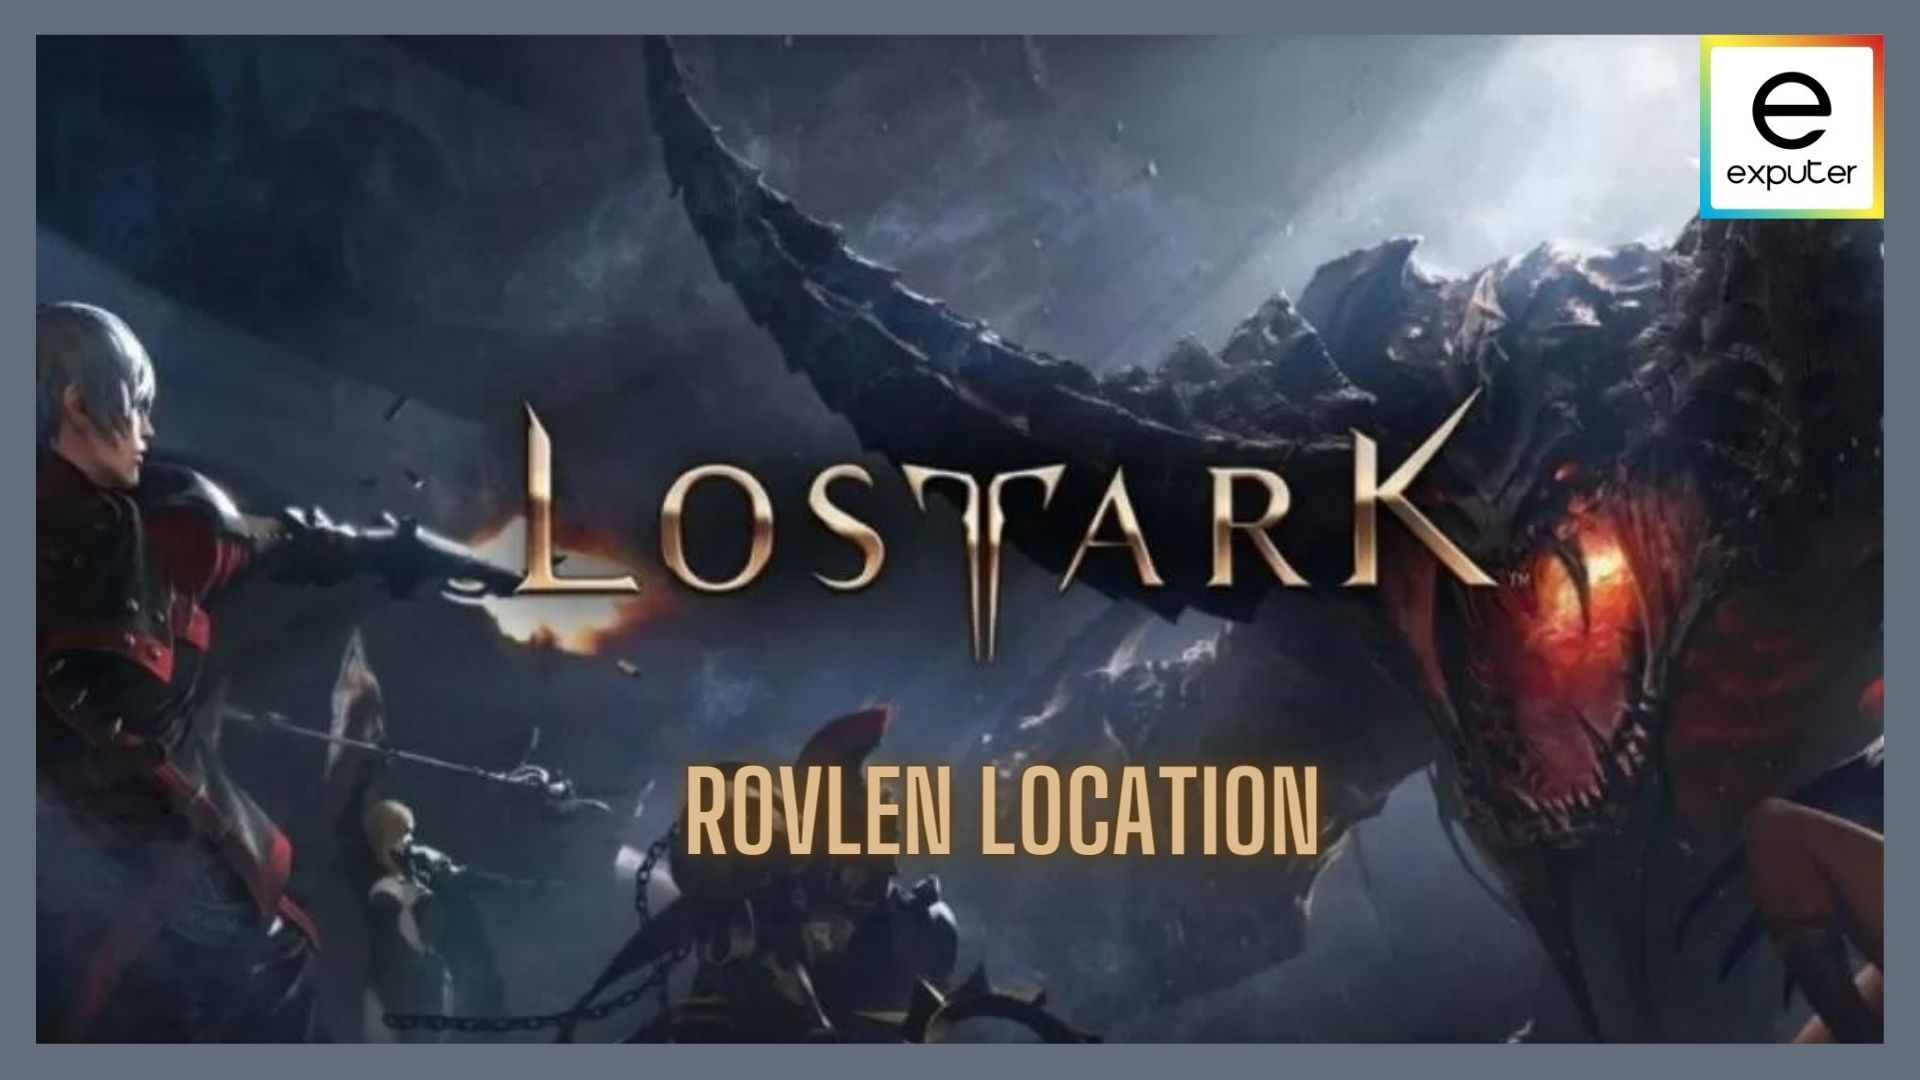 location and how to kill rovlen world boss lost ark